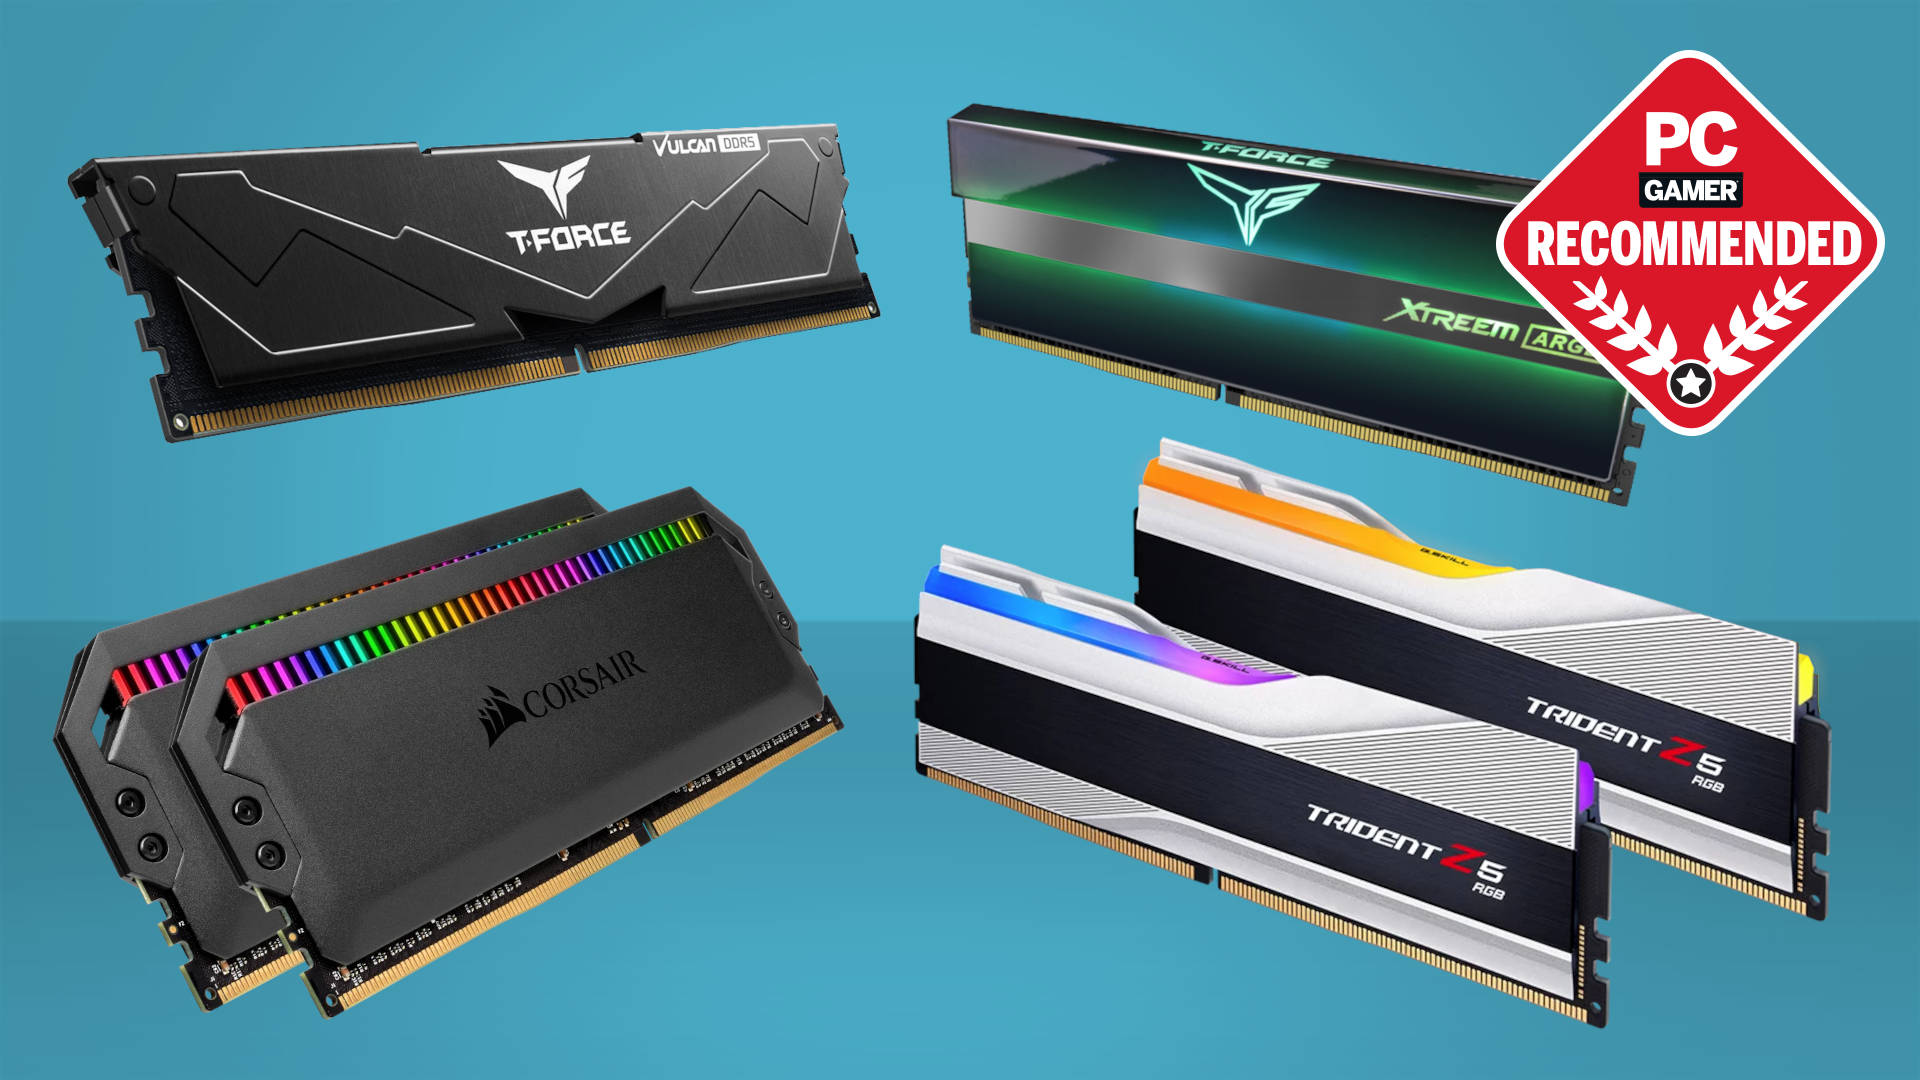 A collection of DDR4 and DDR5 DIMMs against a blue background, with a PC Gamer Recommended logo